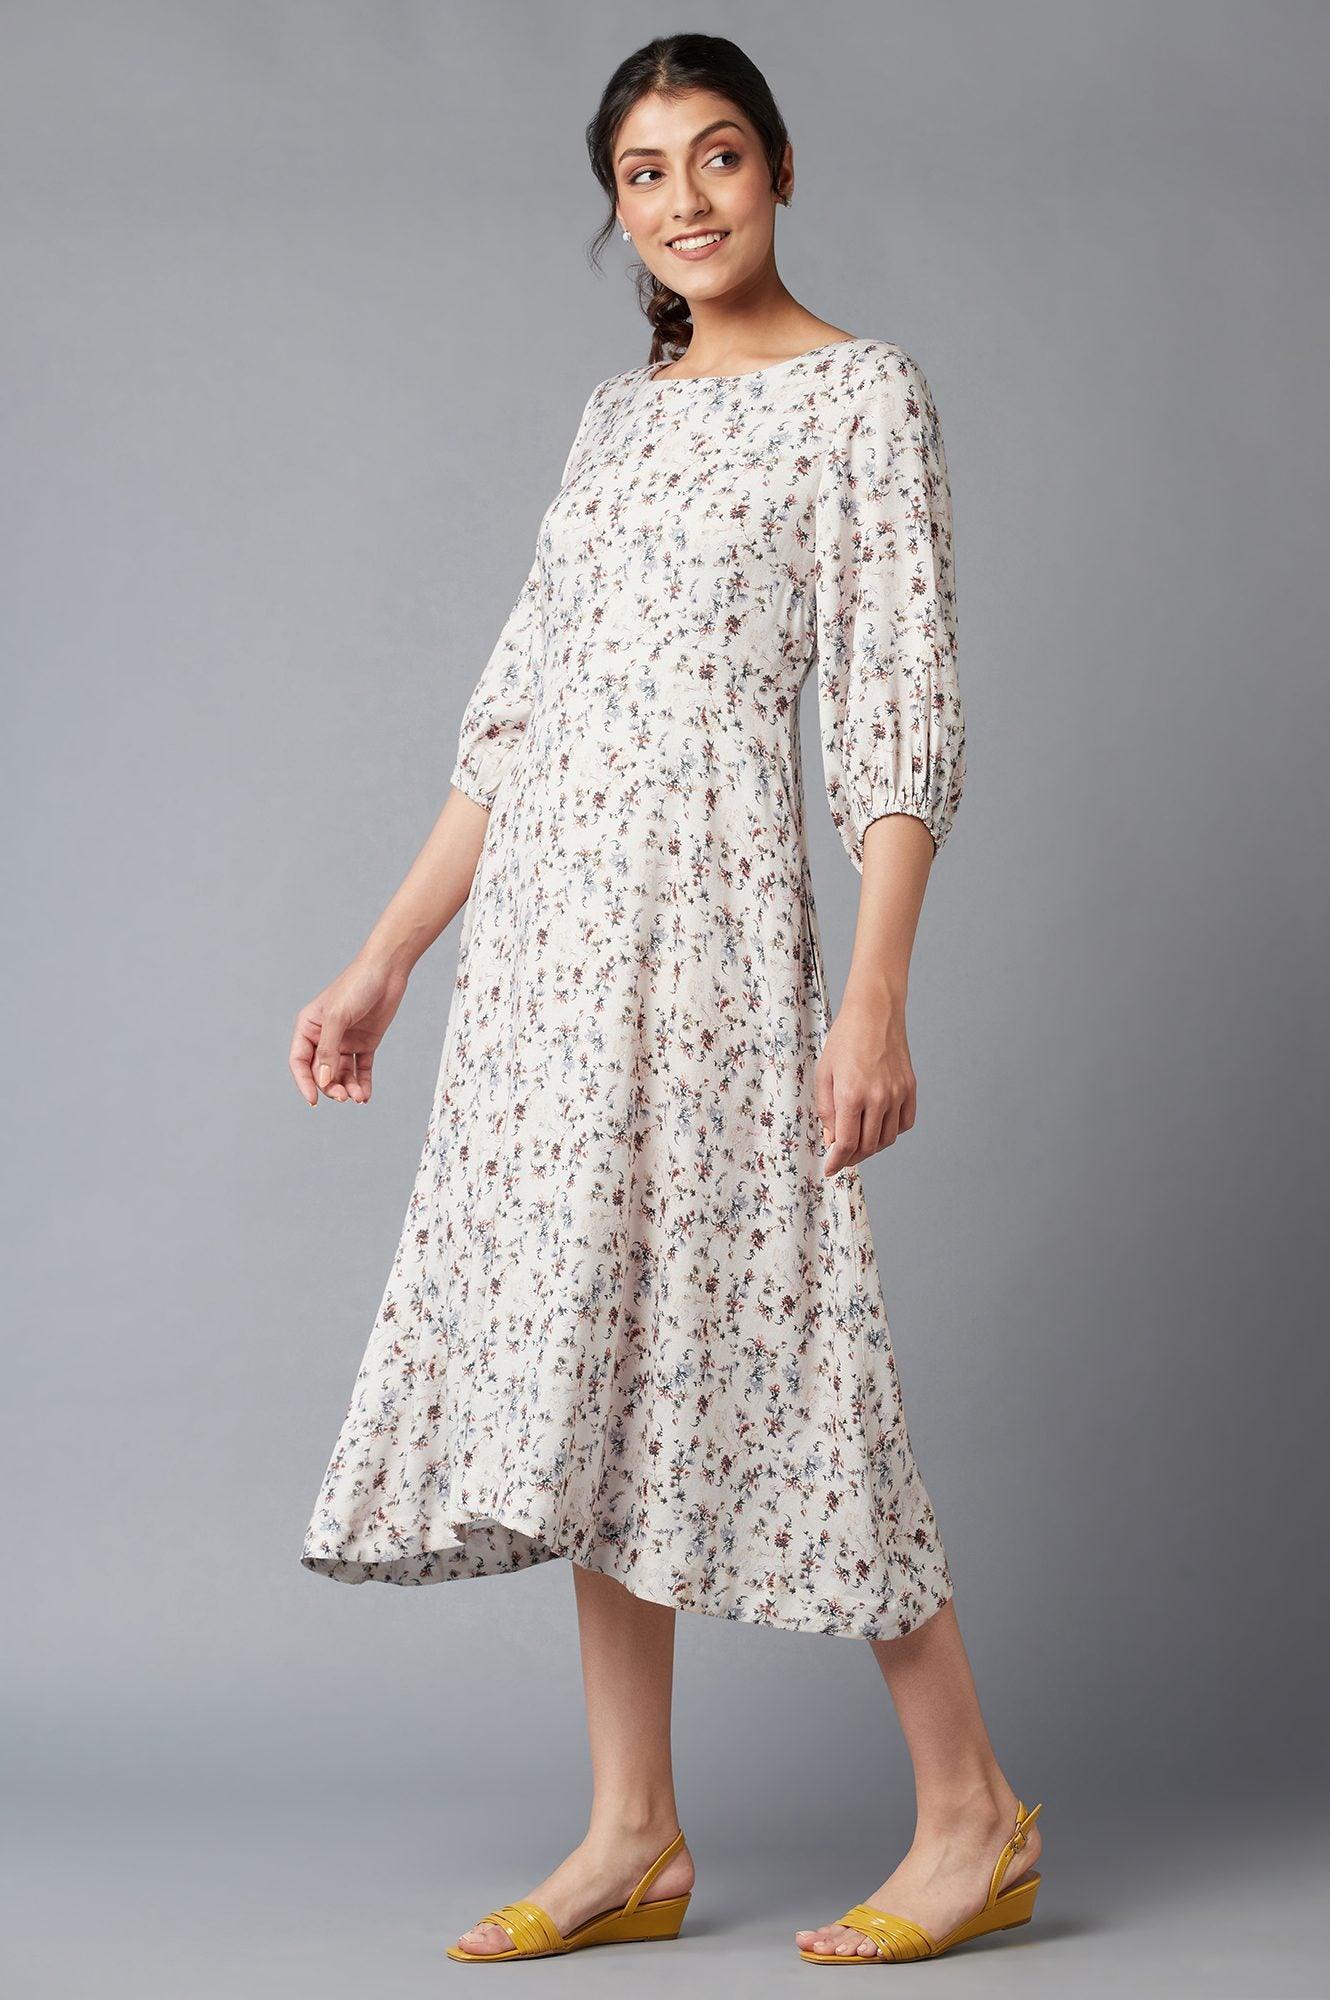 Light Pink Floral Print Dress In Round Neck - wforwoman